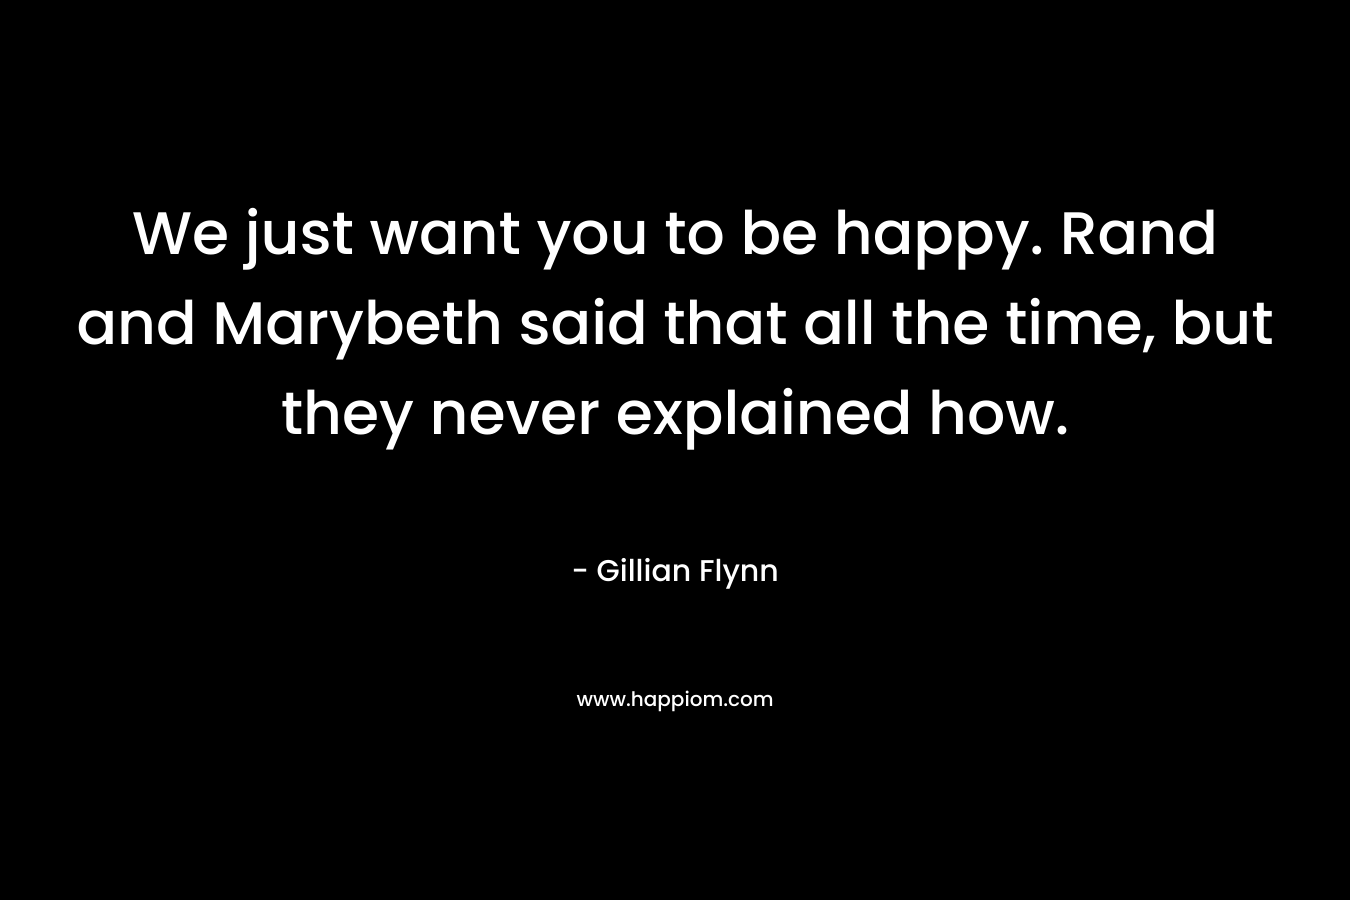 We just want you to be happy. Rand and Marybeth said that all the time, but they never explained how.